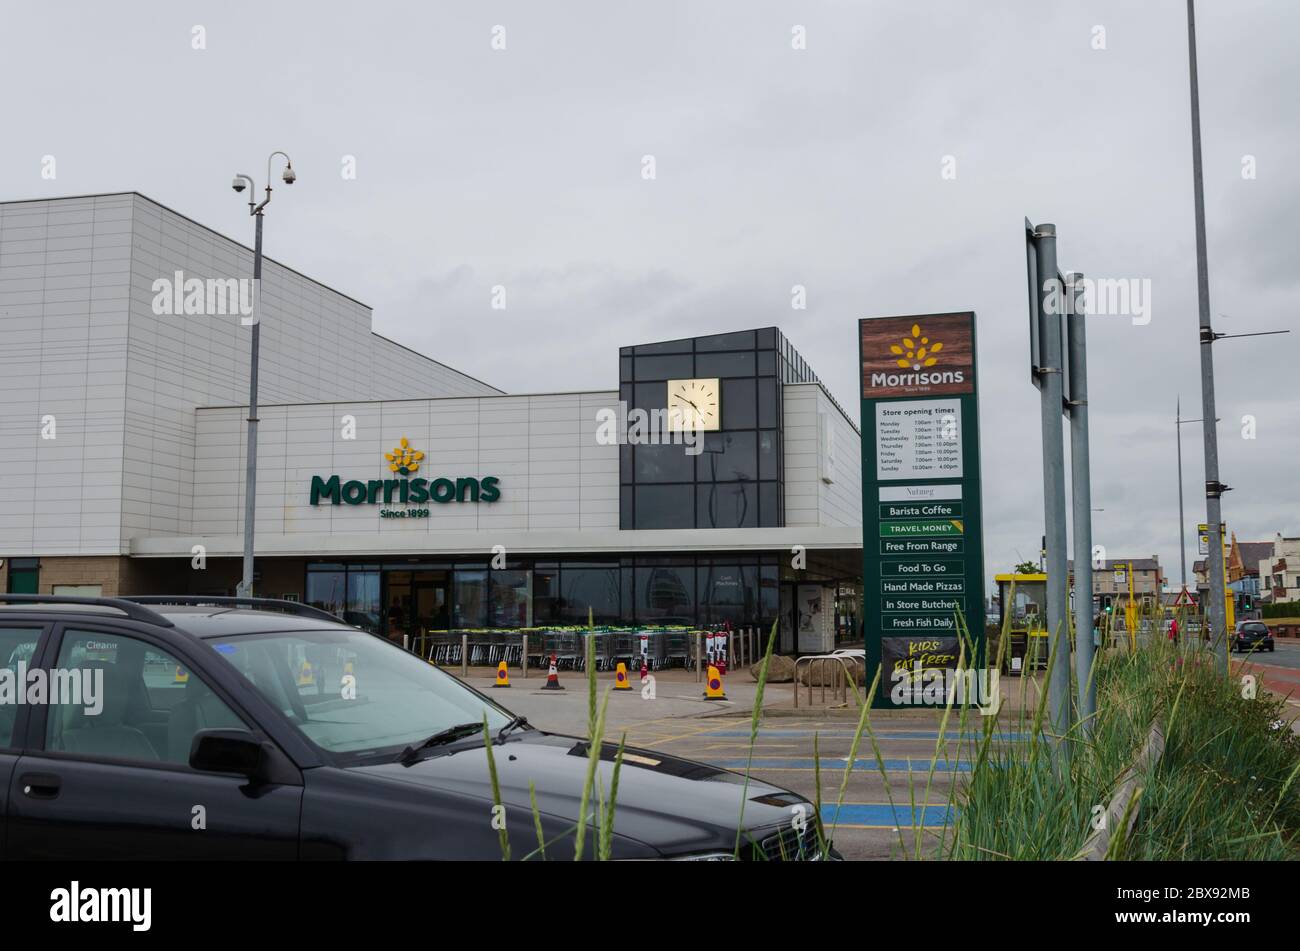 New Brighton, UK: Jun 3, 2020: The drop off and collection point at the front of Morrisons supermarket has been closed and coned off to help with soci Stock Photo